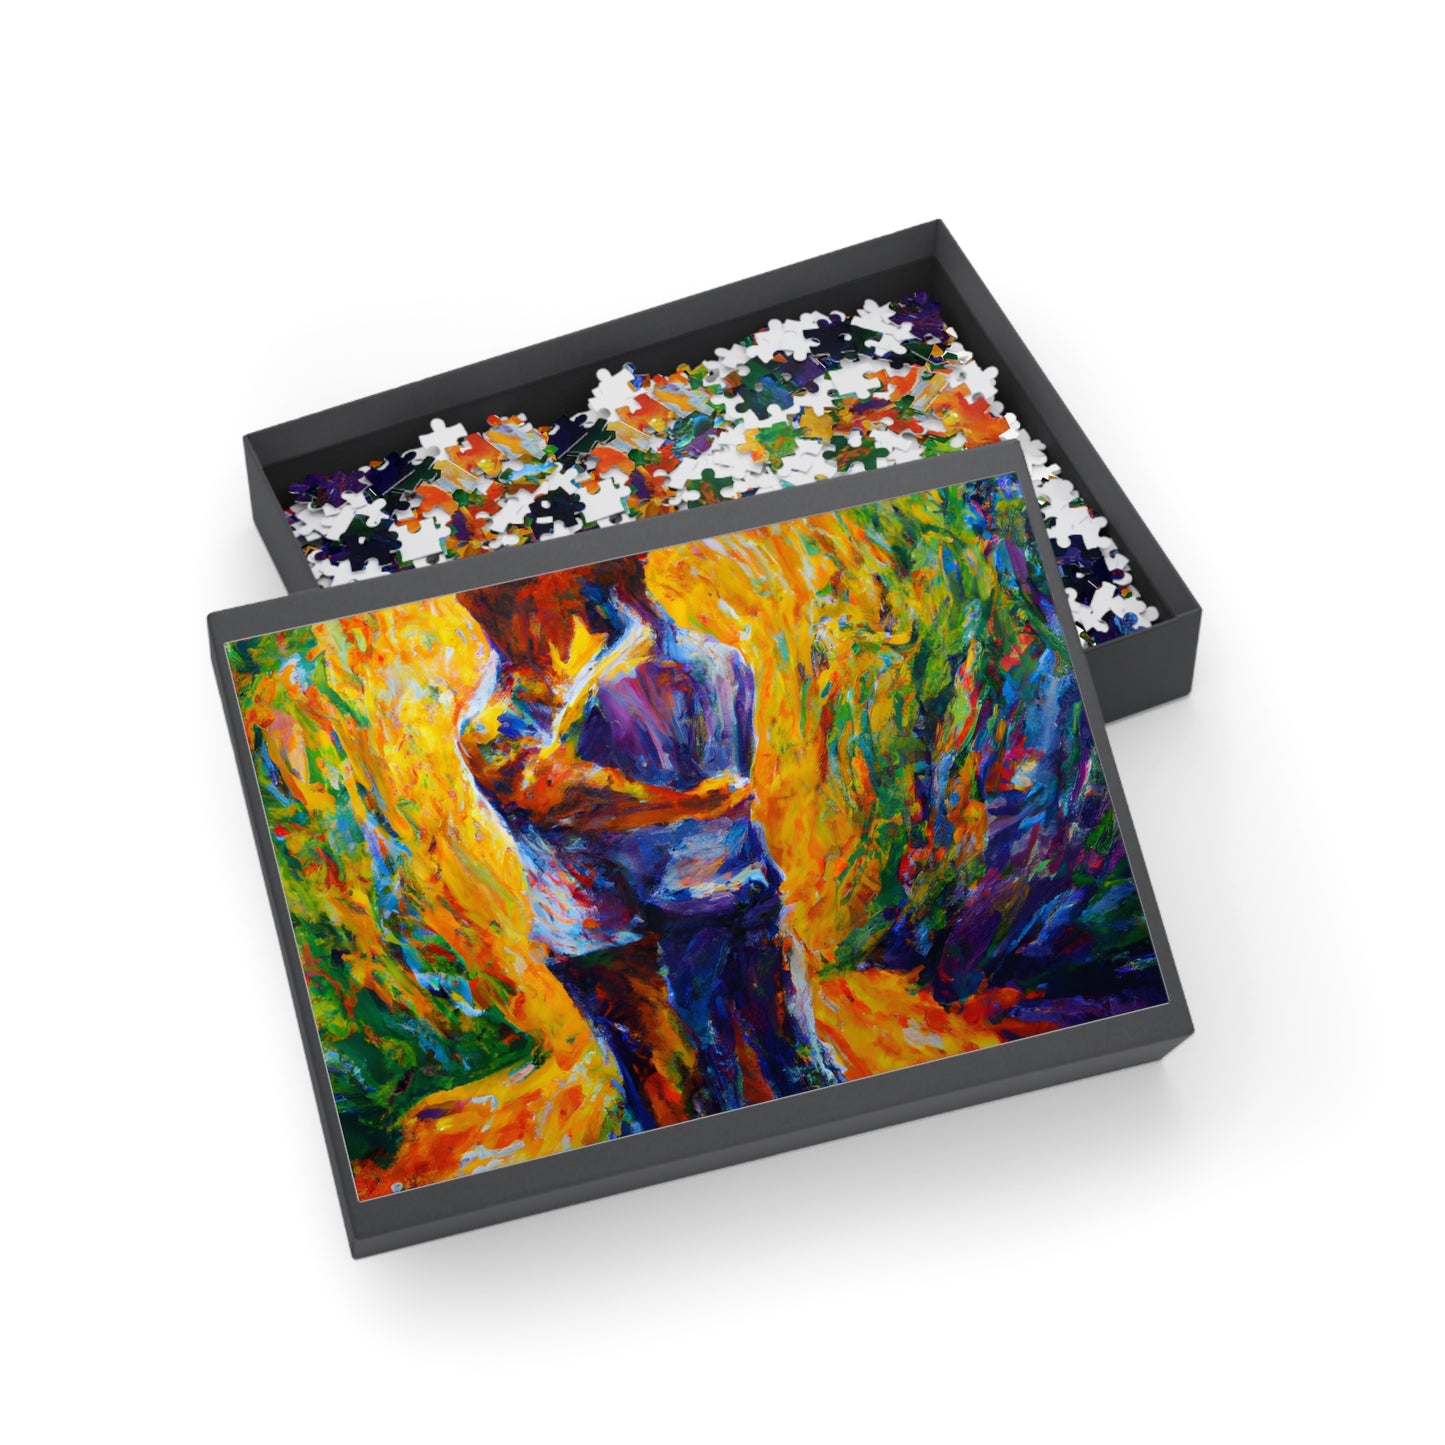 Chase - Gay Love Jigsaw Puzzle